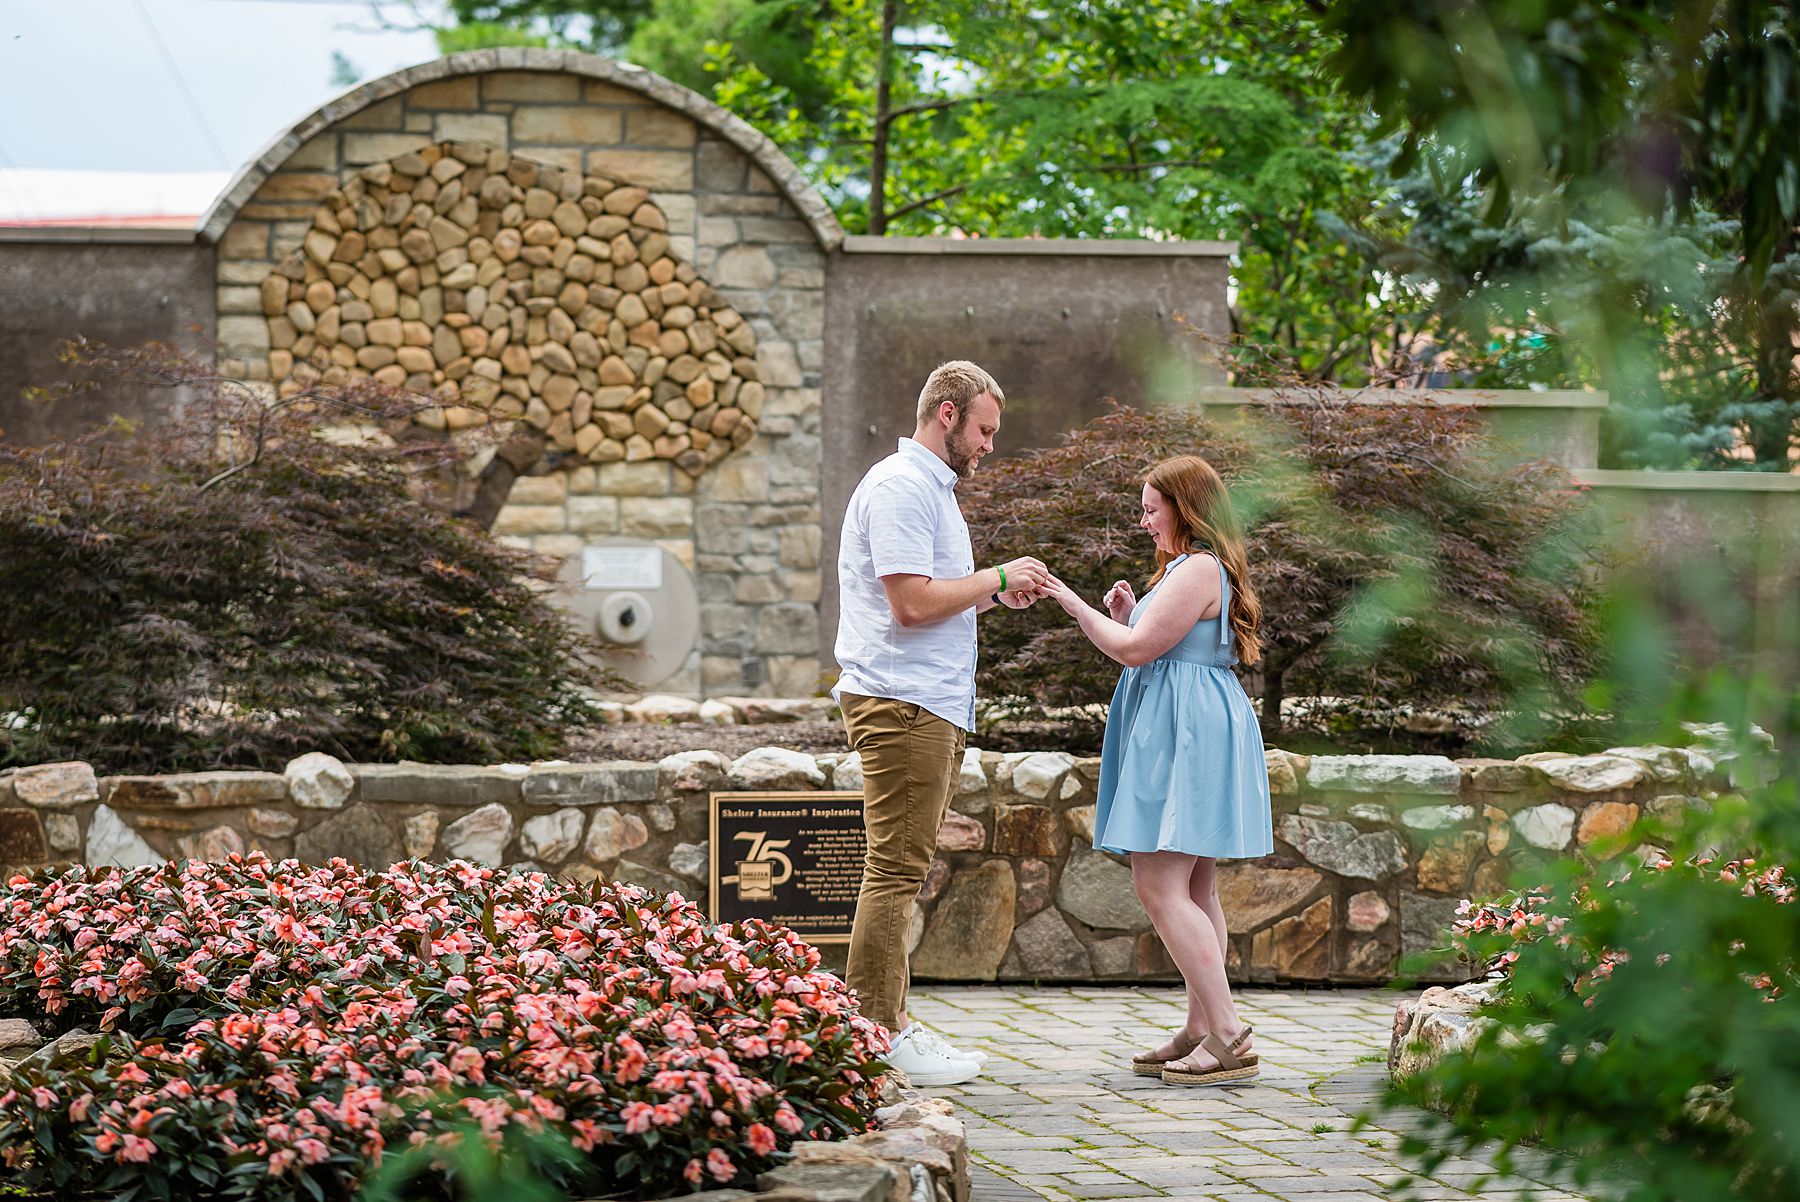 One of our Columbia MO Photographers capture the moment Zak proposed to Lauren